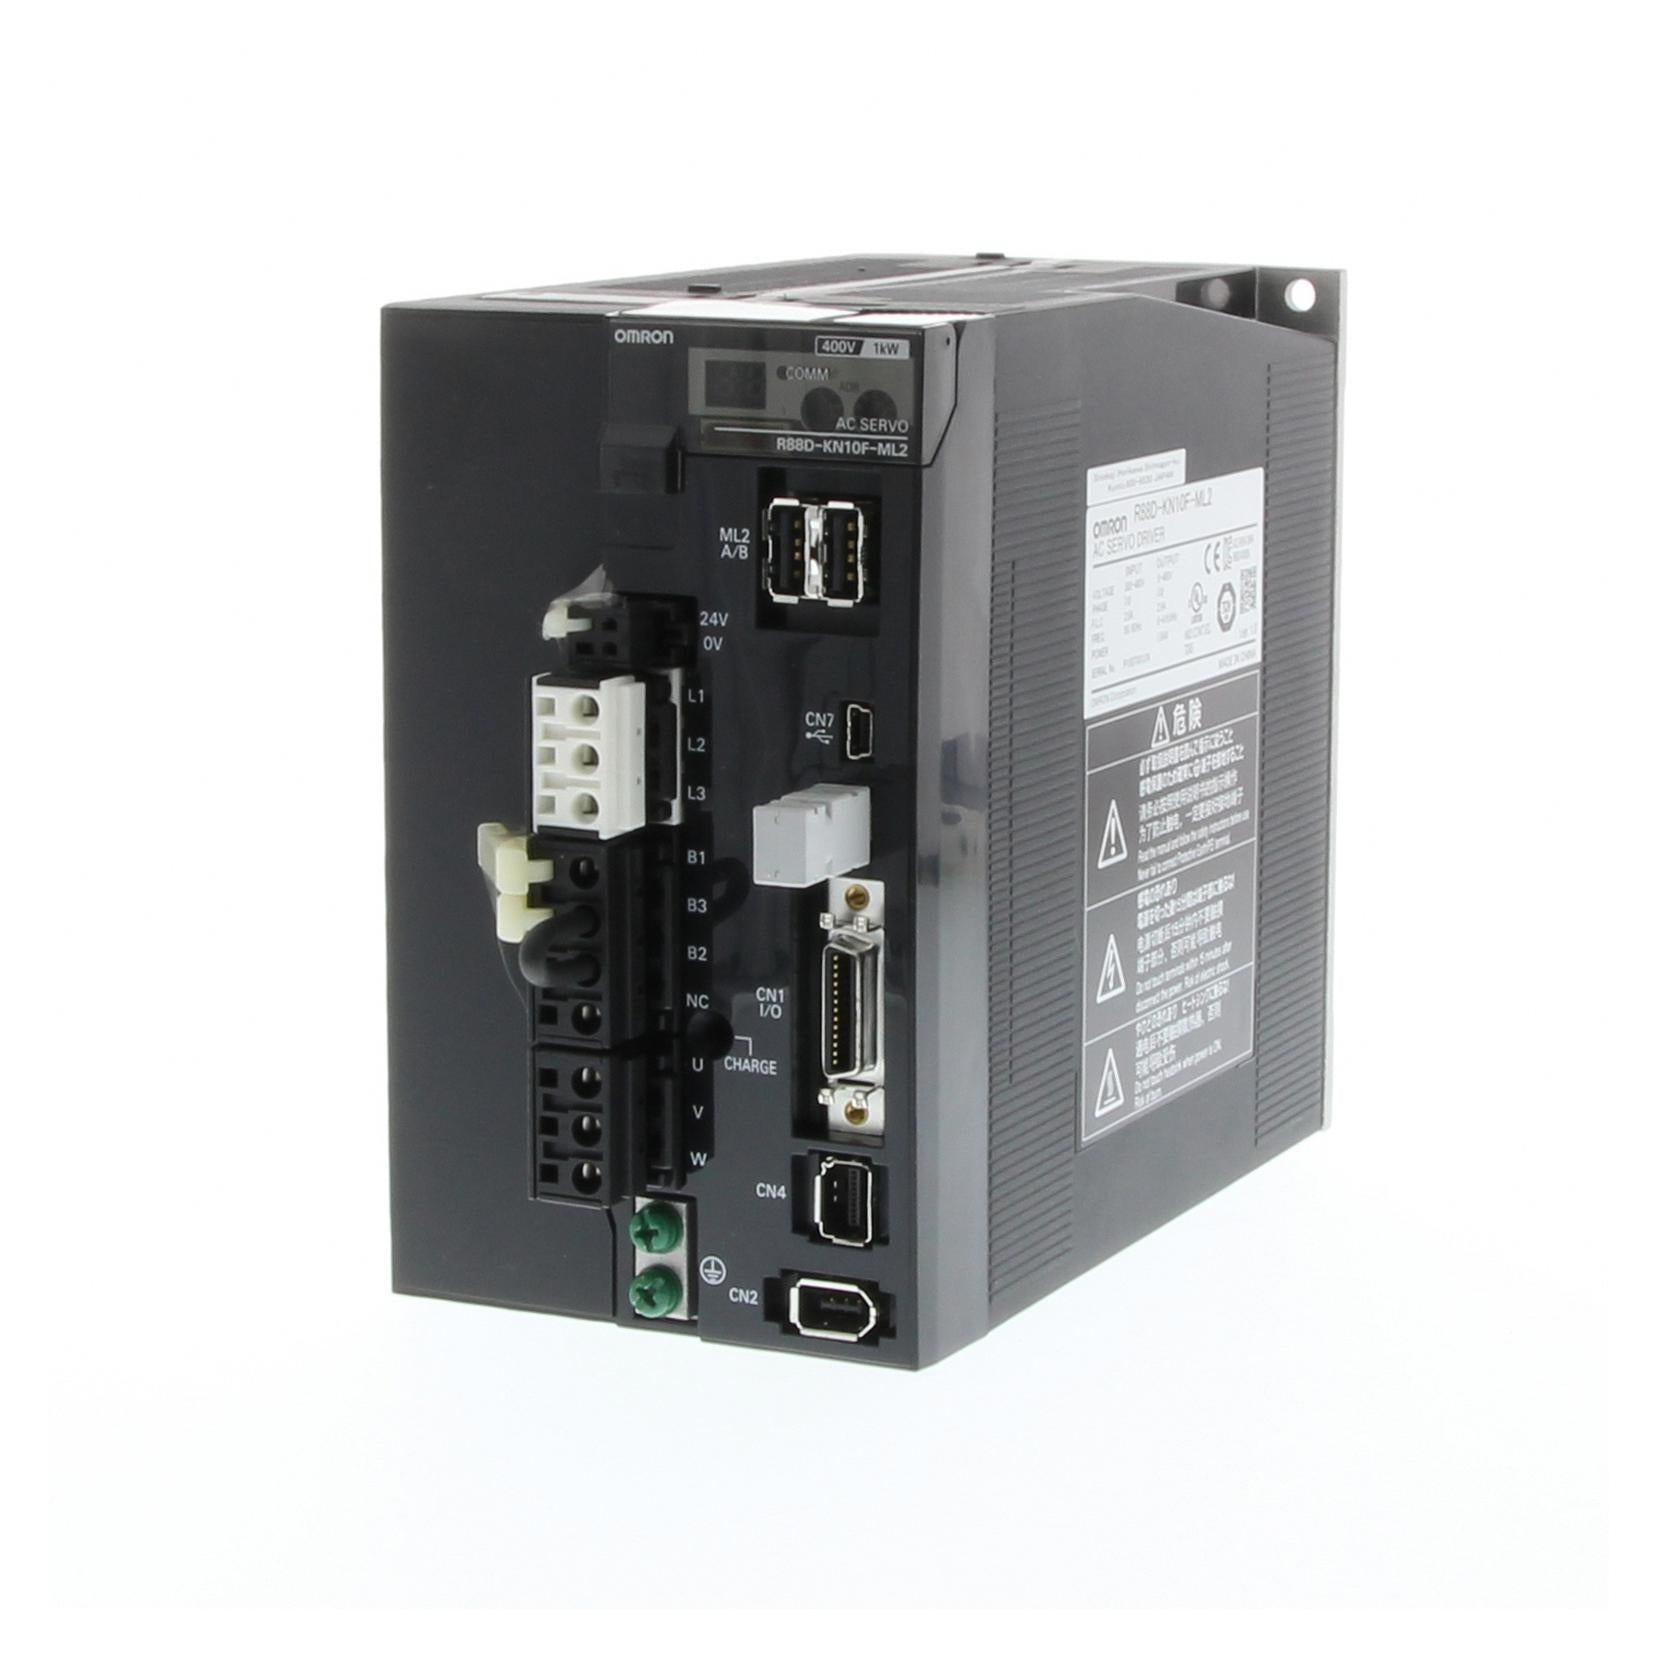 R88D-KN50F-ML2 AC MOTOR SPEED CONTROLLERS OMRON